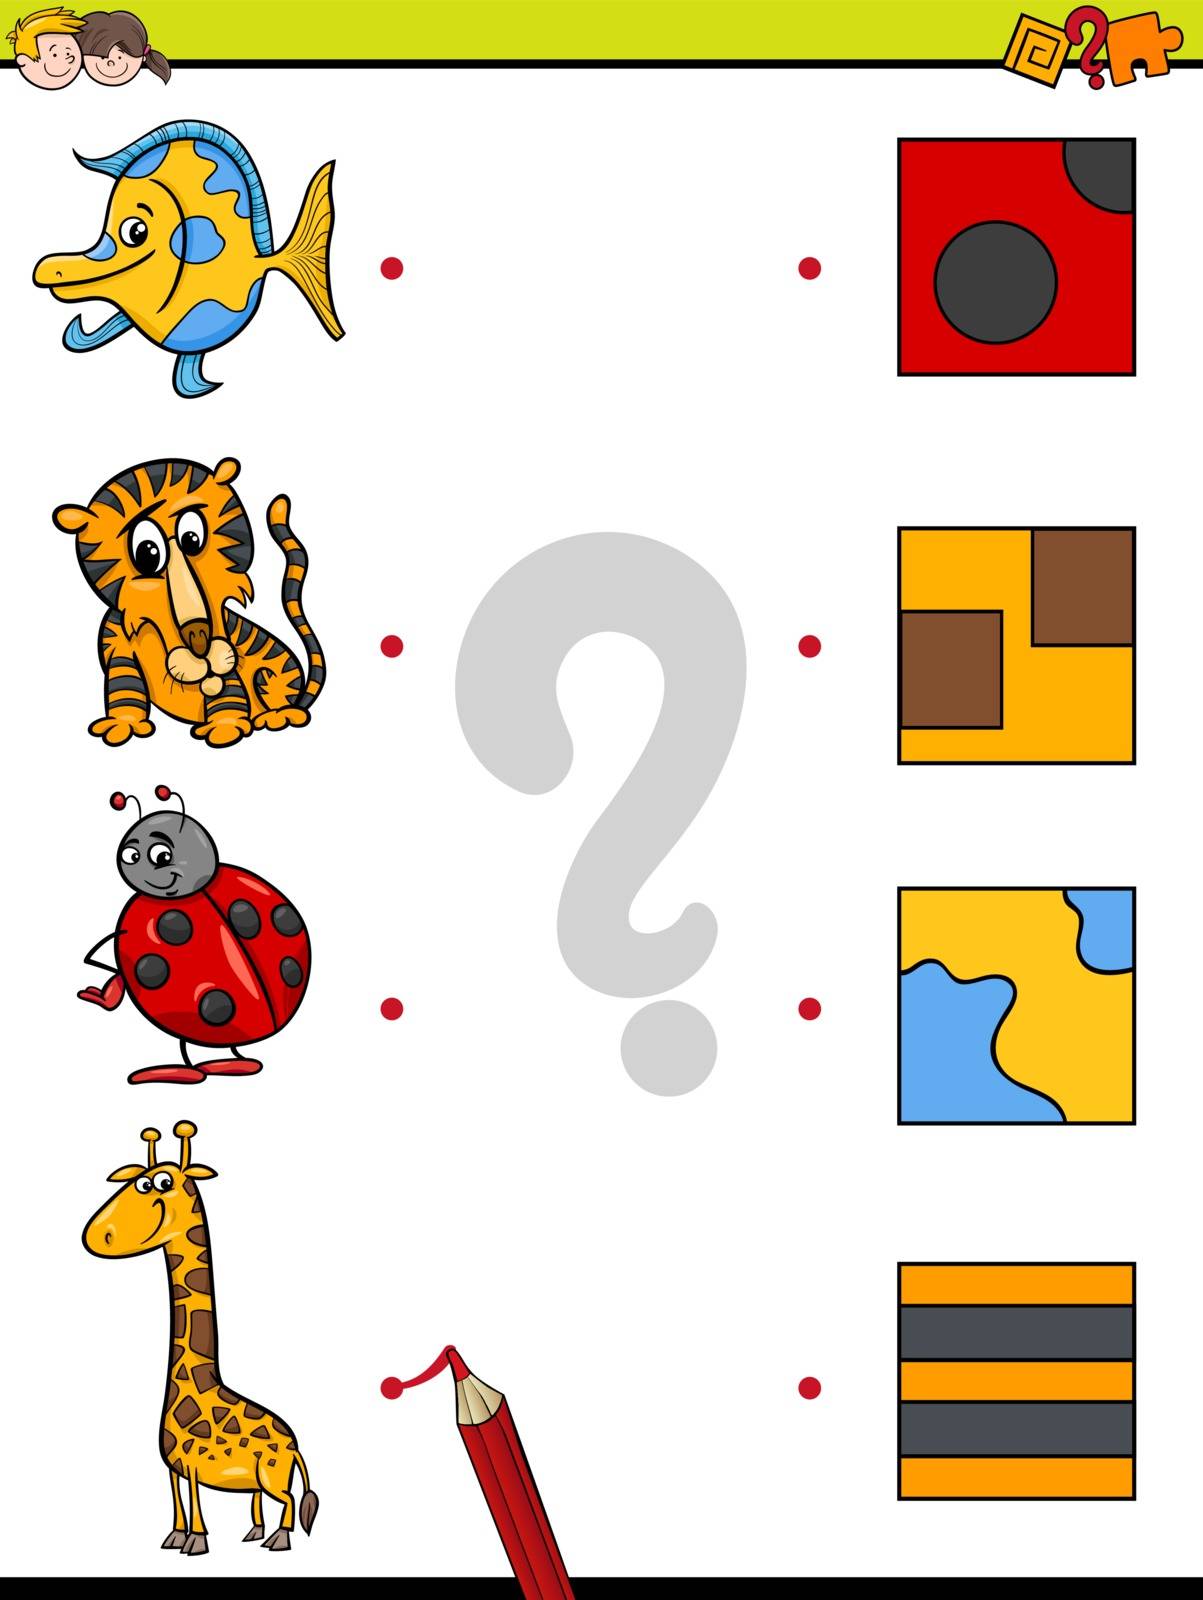 Cartoon Illustration of Education Element Matching Game for Children with Animals